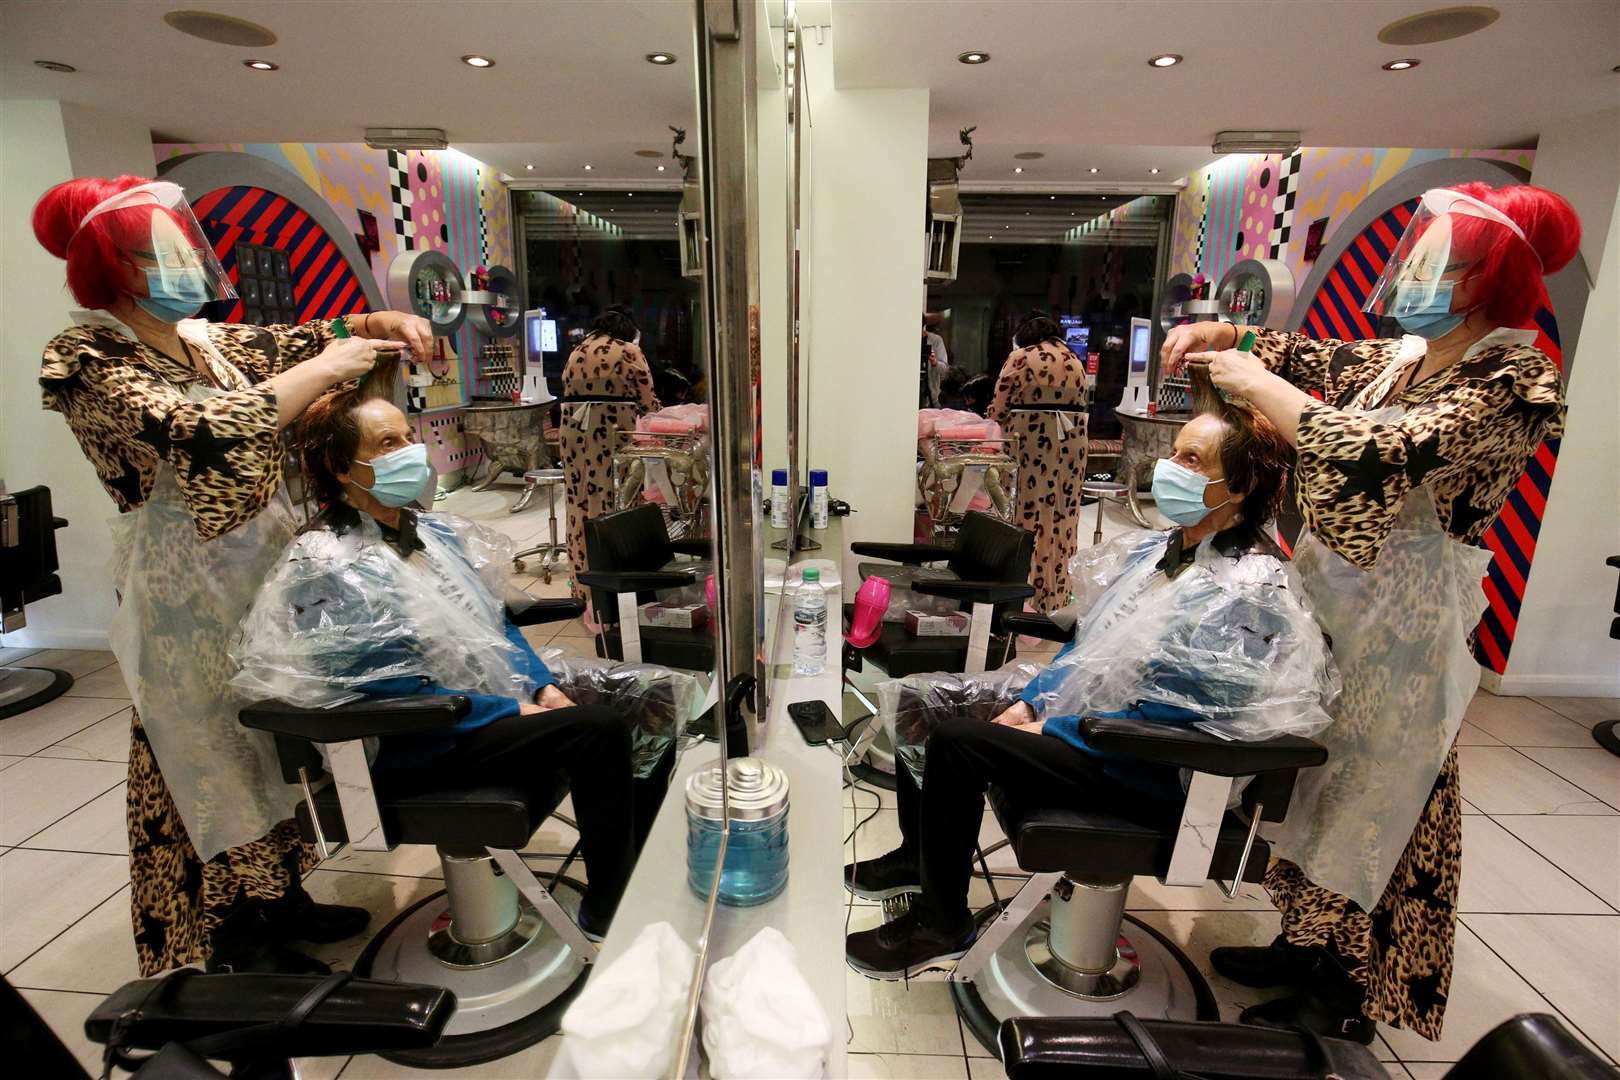 Ms Rickaby said she was happy to be able to give people a mental health boost by being back in the salon (Jonathan Brady/PA)